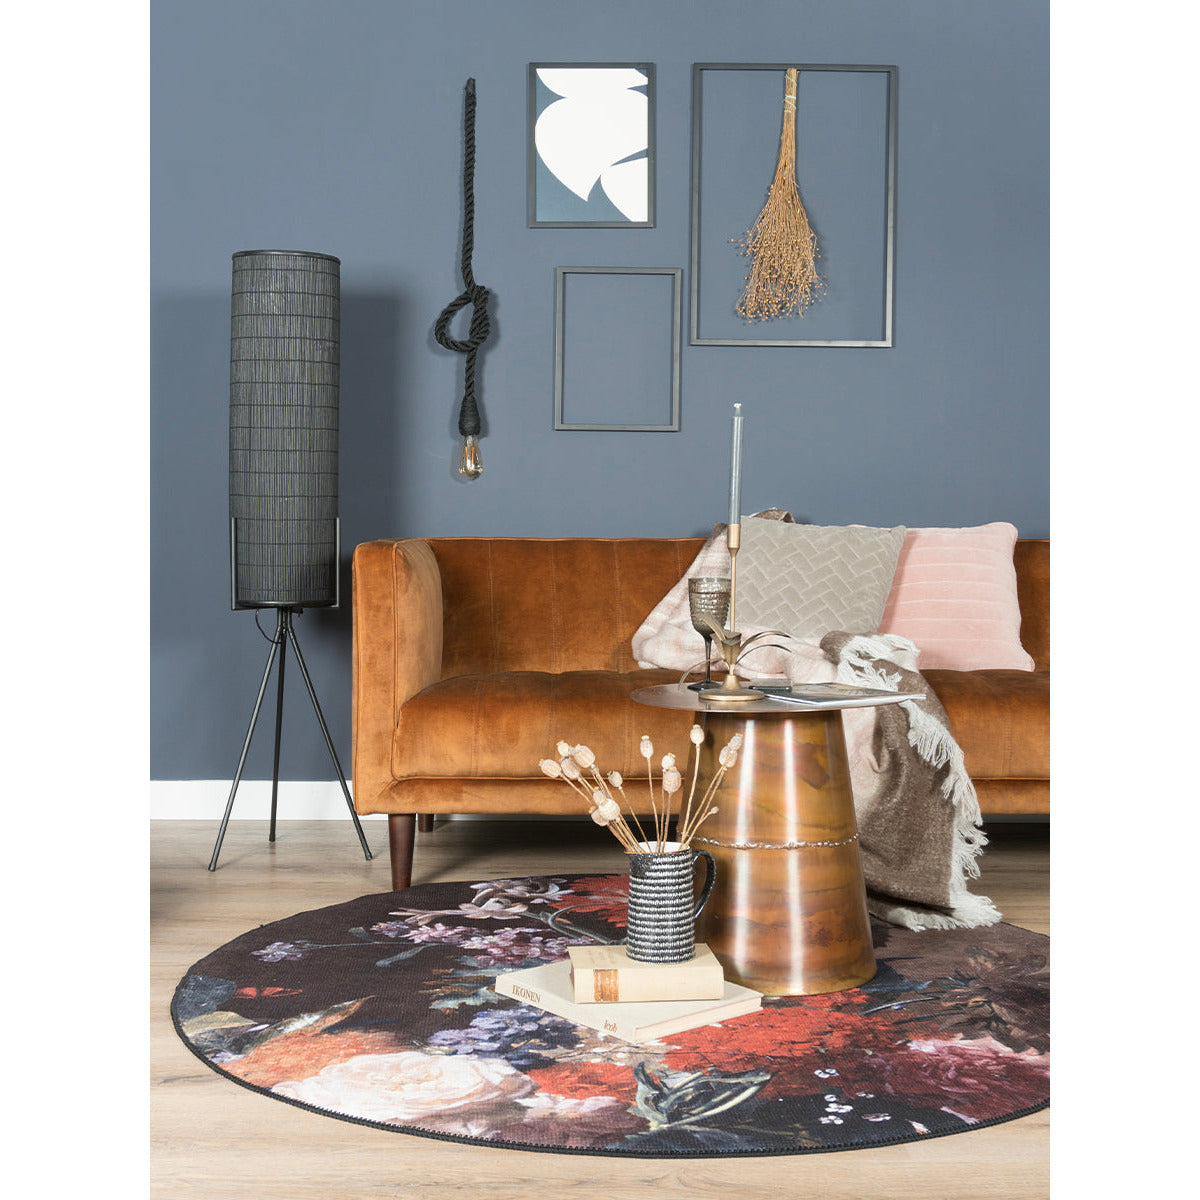 Rug Remy Rond Rond